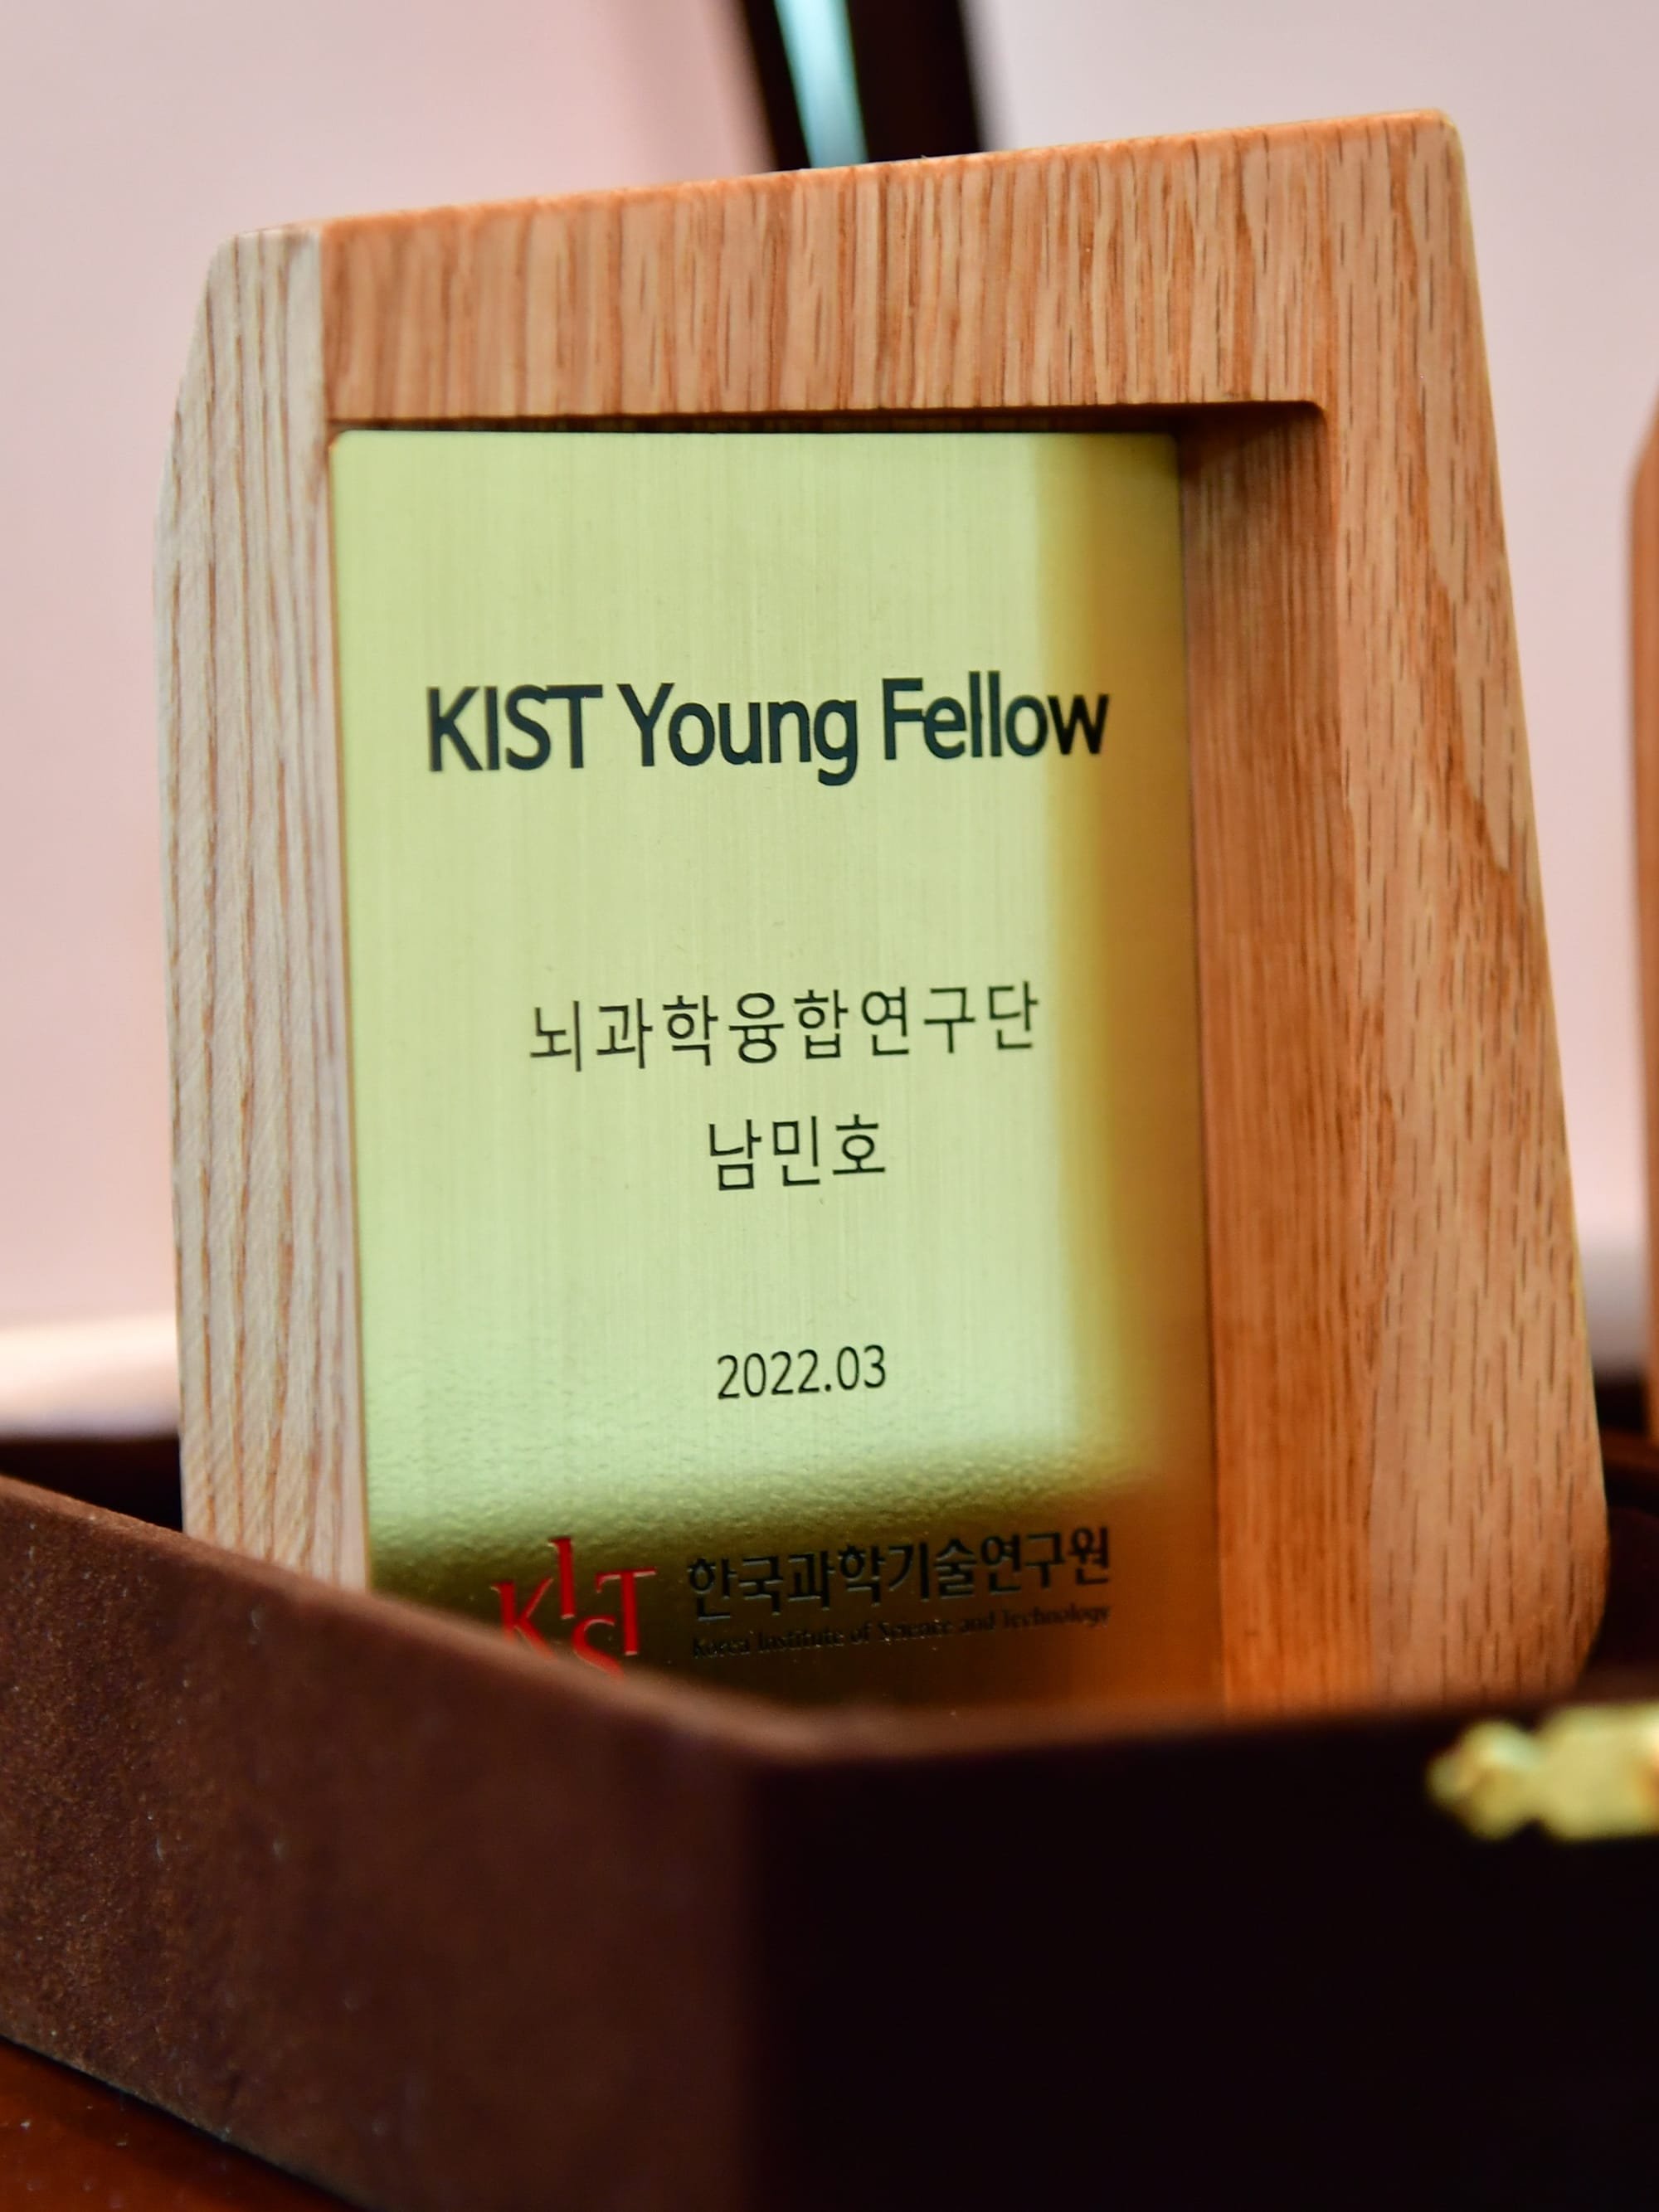 Dr. Min-Ho Nam is selected as the KIST Young Fellow 2022